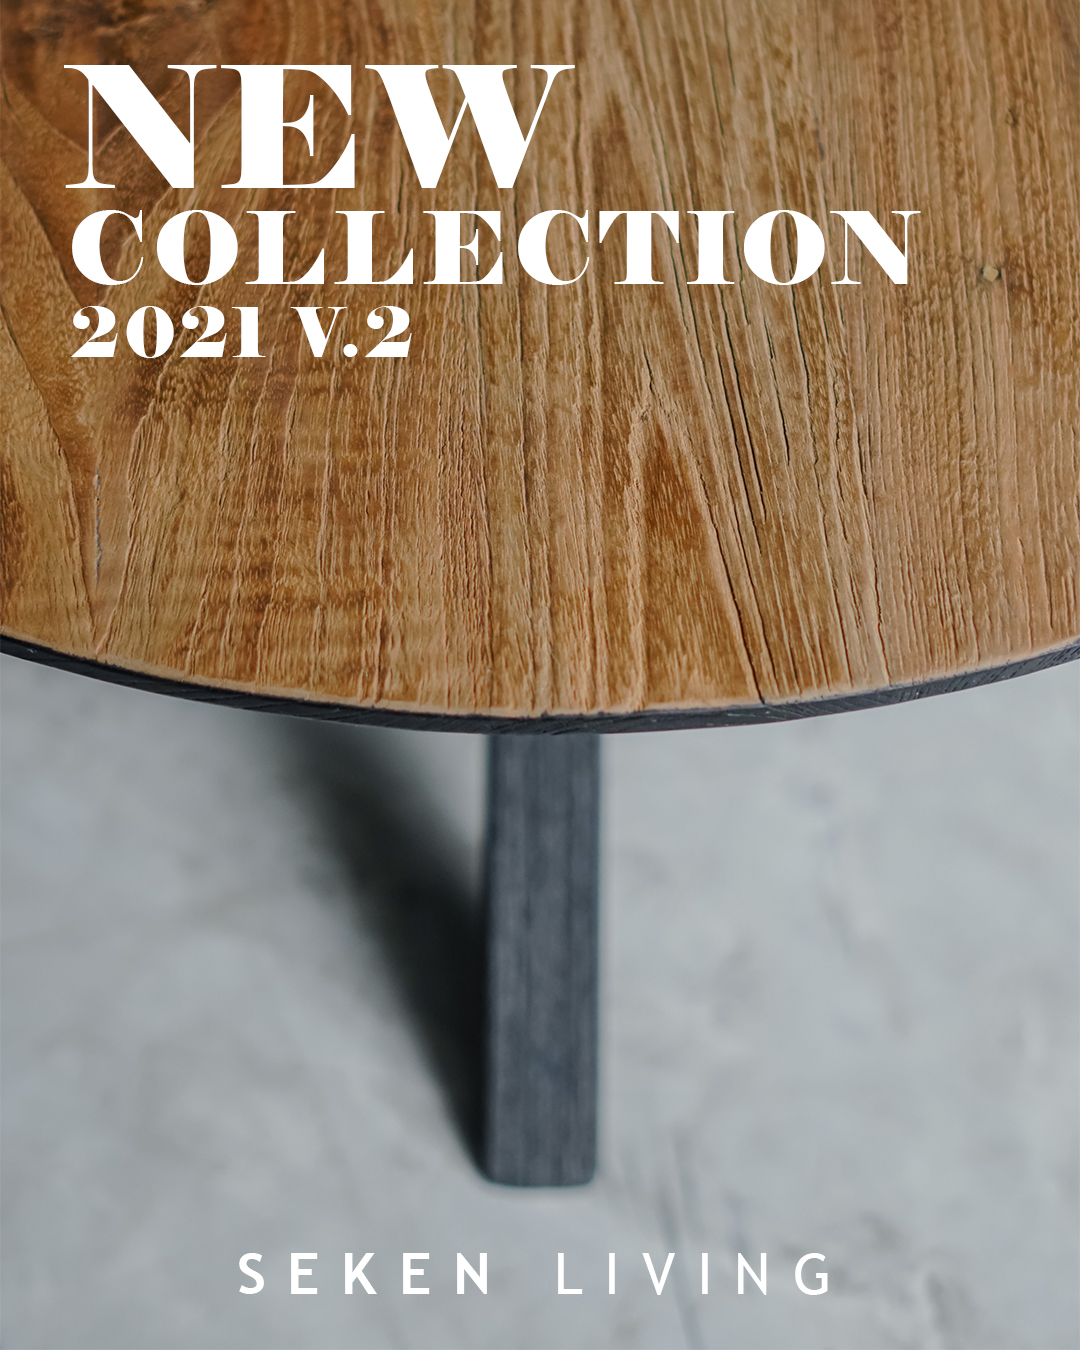 New Collection 2021 v.2